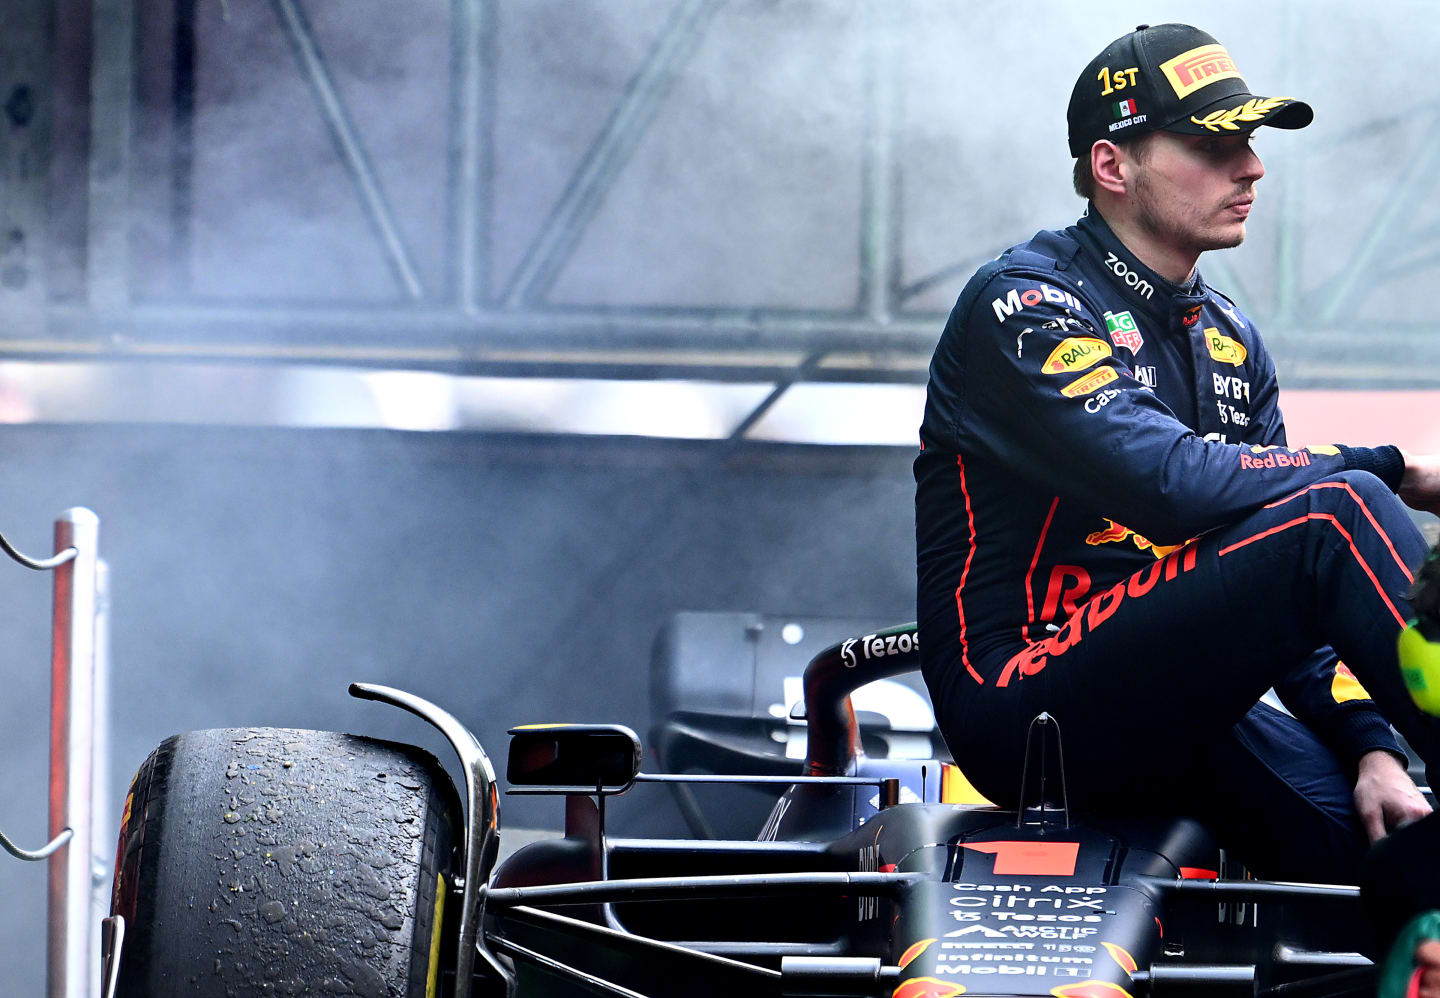 MEXICO CITY, MEXICO - OCTOBER 30: Race winner Max Verstappen of the Netherlands and Oracle Red Bull Racing celebrates on the podium during the F1 Grand Prix of Mexico at Autodromo Hermanos Rodriguez on October 30, 2022 in Mexico City, Mexico. (Photo by Clive Mason - Formula 1/Formula 1 via Getty Images)